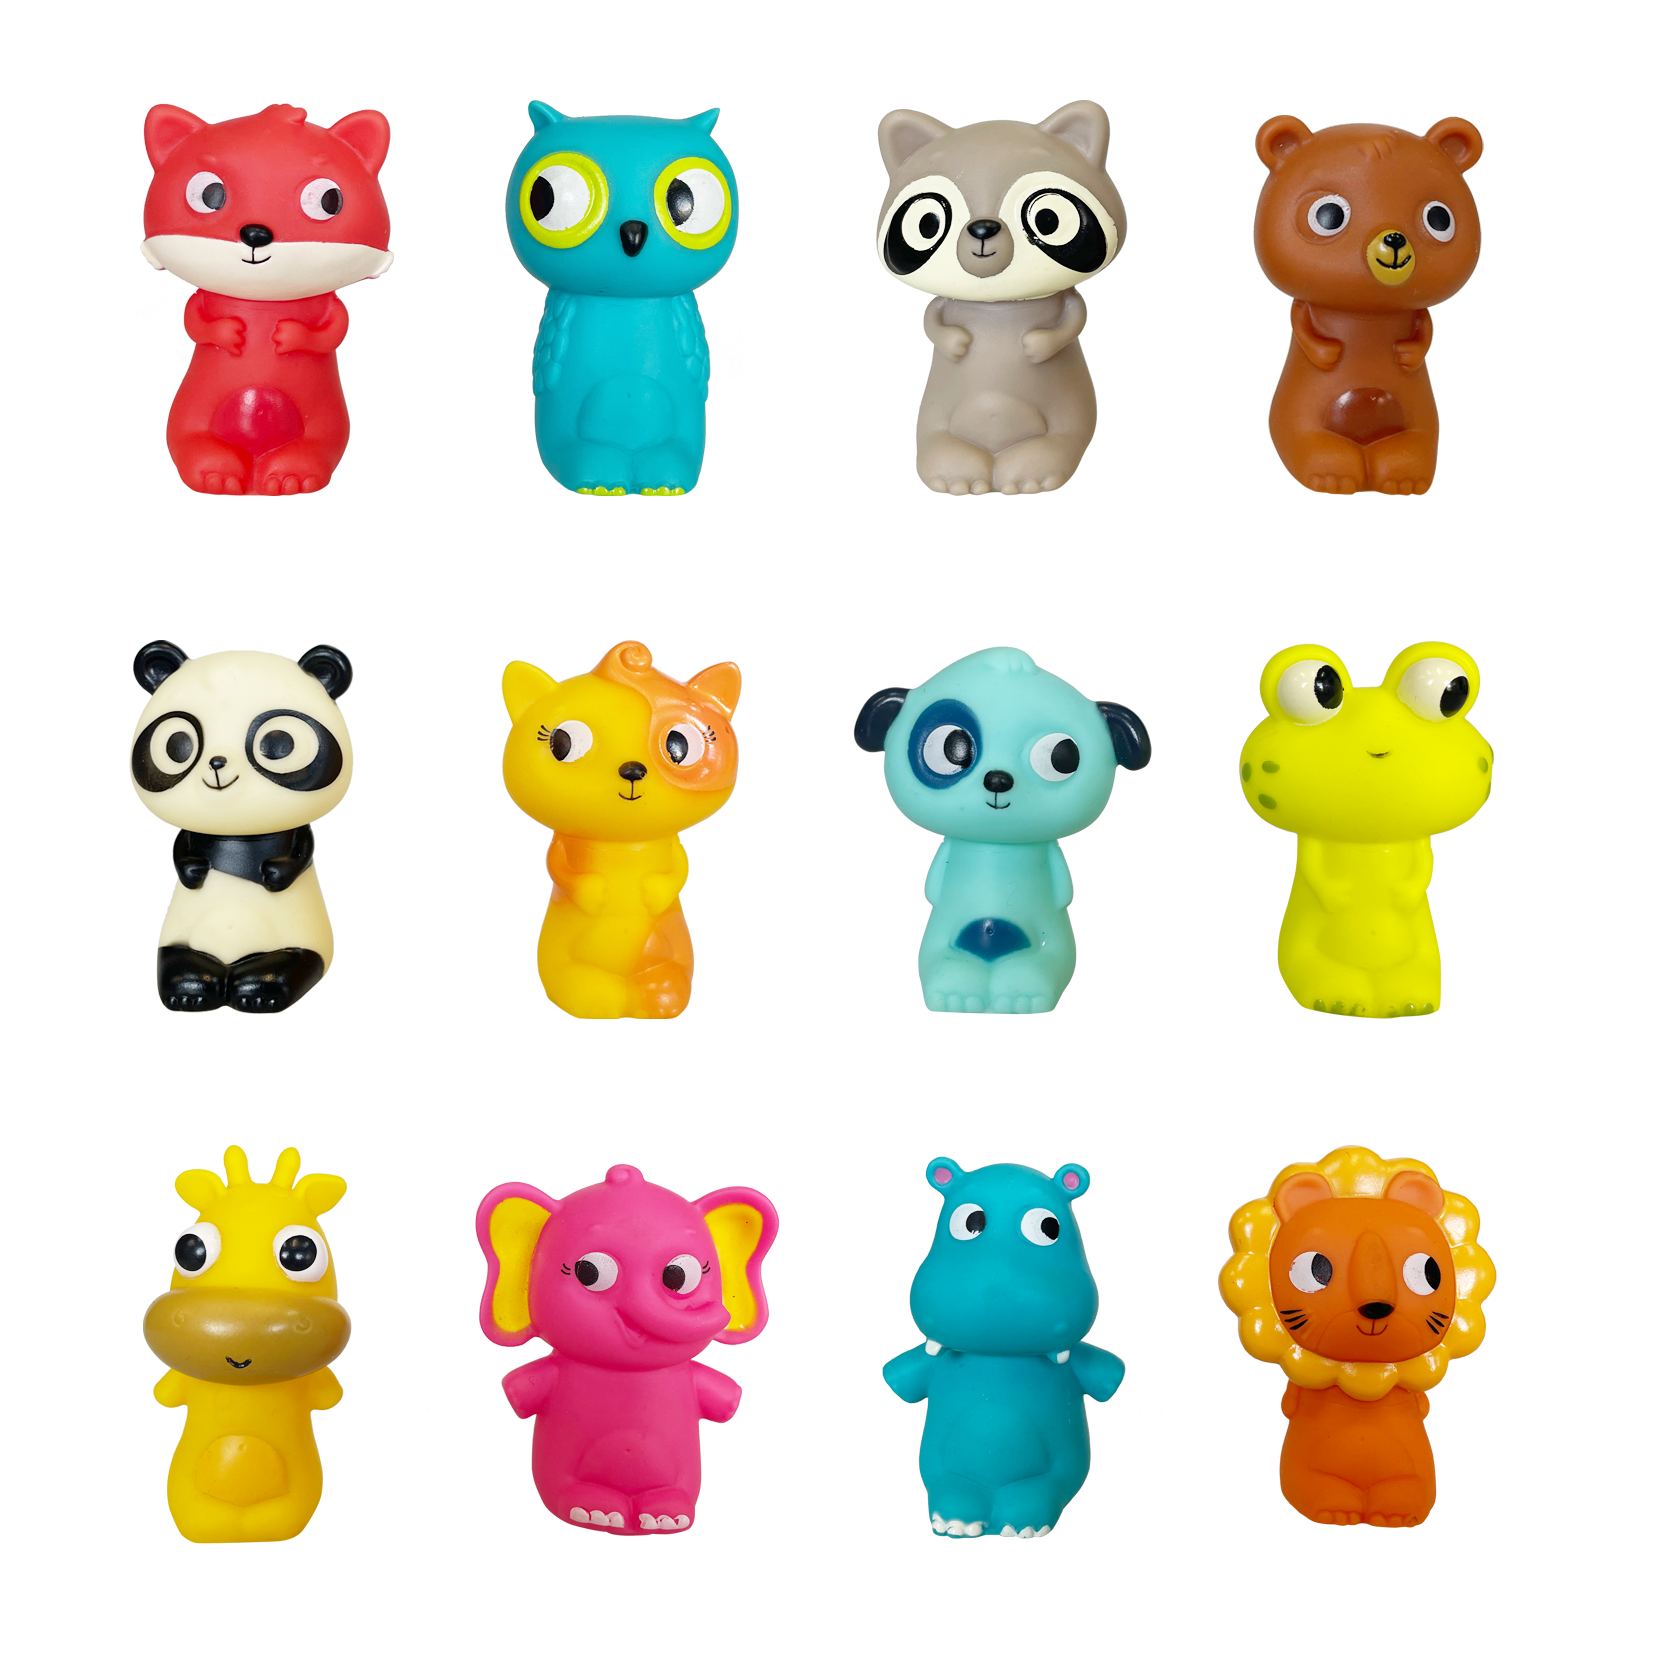 4x Finger Puppets Plastic Toy Baby Mini Animals Educational Hand Cartoon Rubber Doll Hand Puppet Theater Toys for Children Gifts